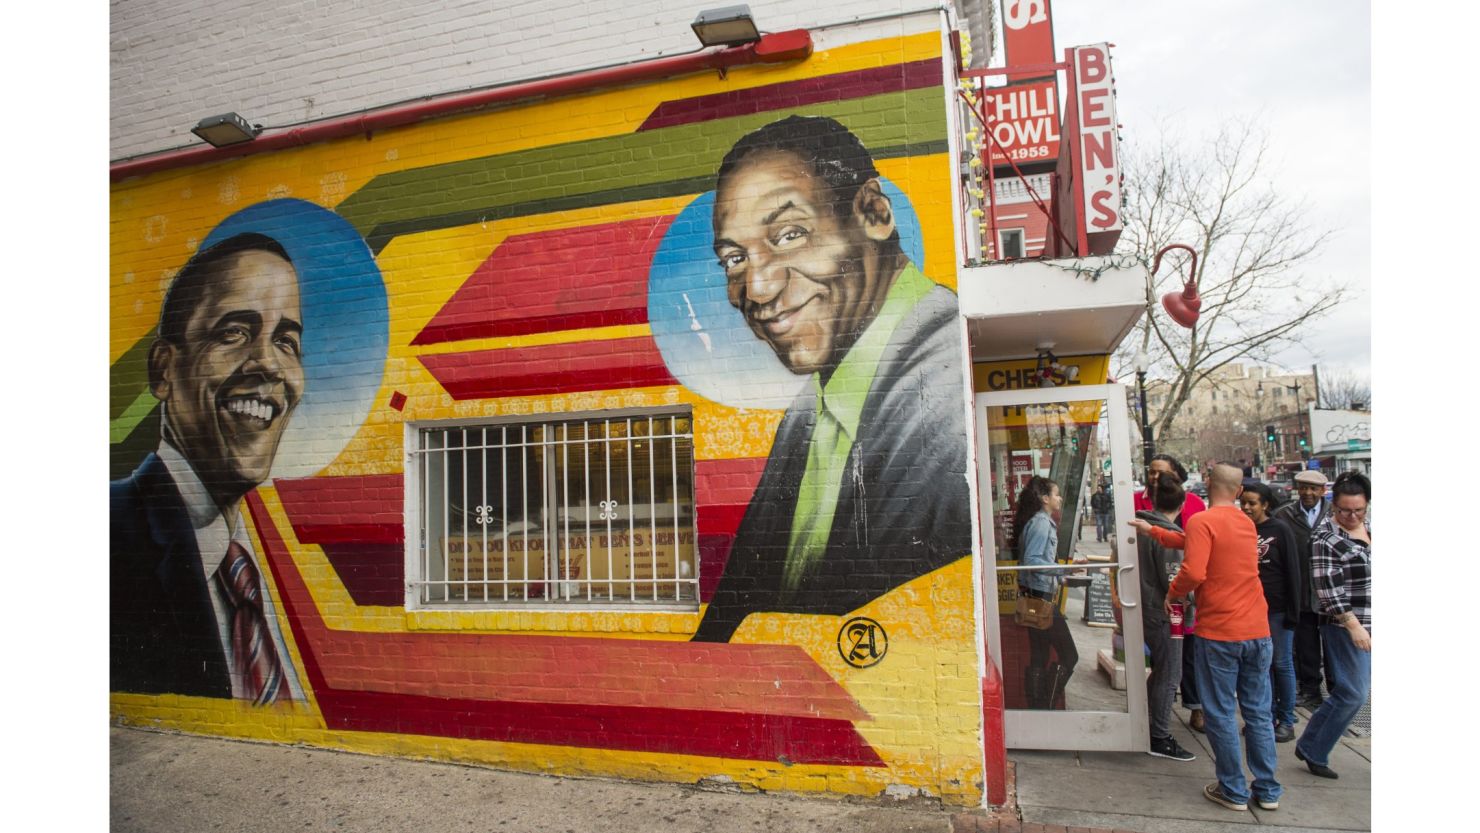 People walk past a mural of comedian Bill Cosby on the side of Ben's Chili Bowl in Washington, D.C. The mural has since been repainted.